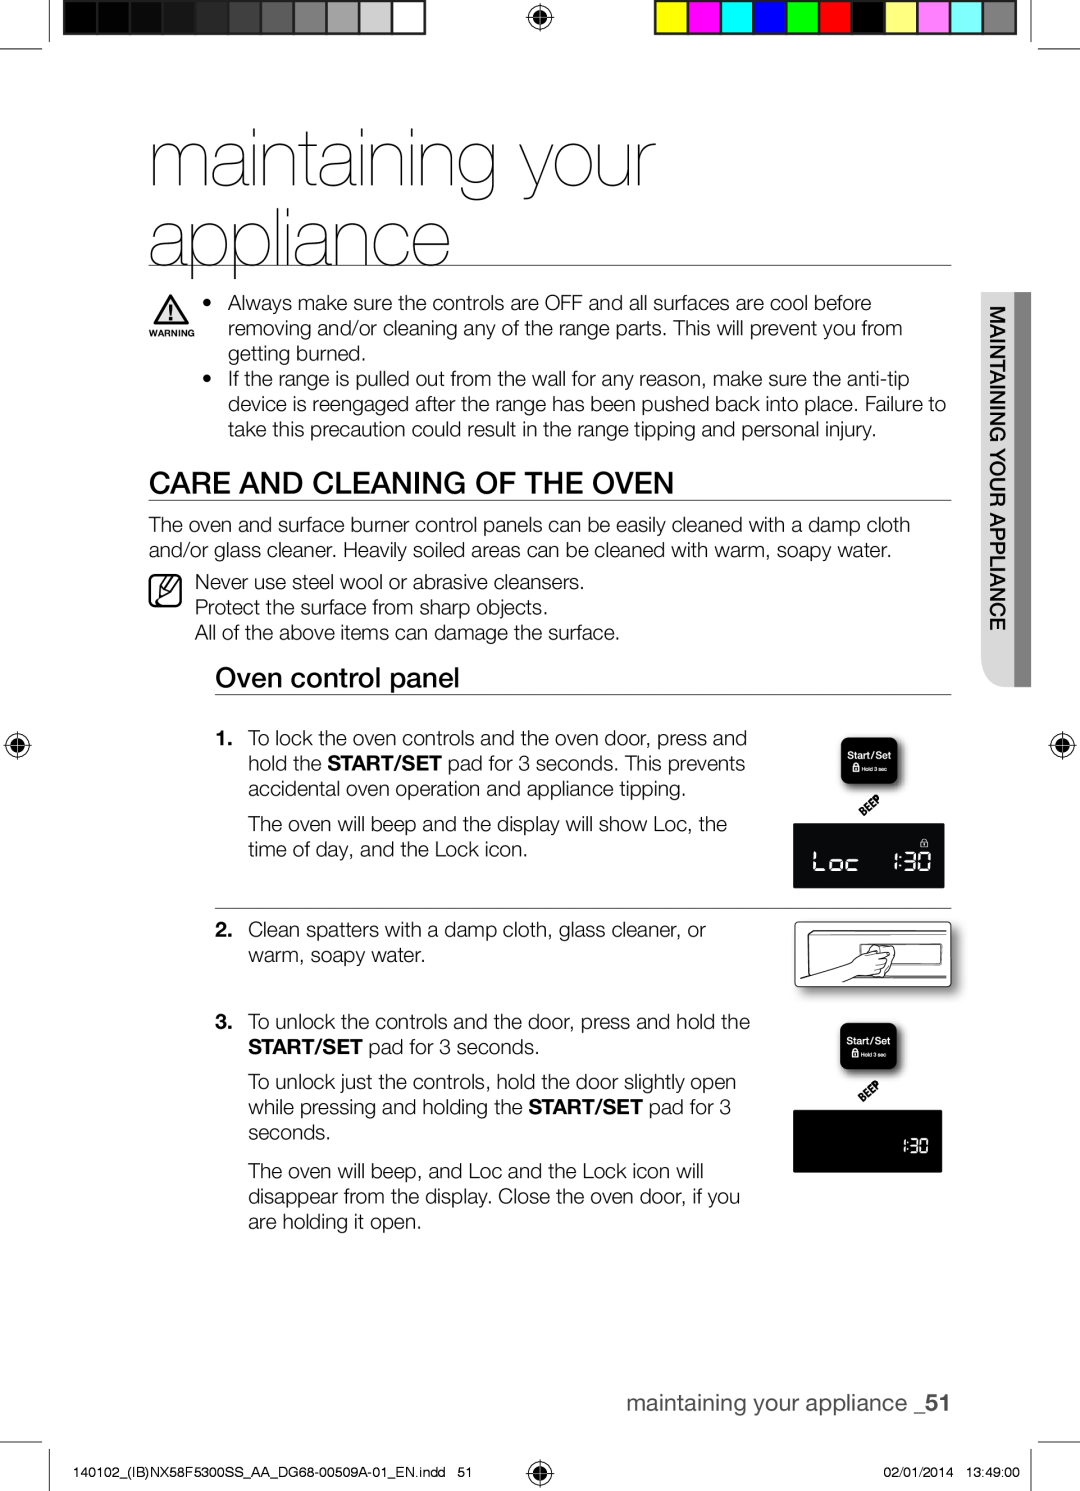 Samsung NX58F5500SW user manual maintaining your appliance, Care And Cleaning Of The Oven, Oven control panel 